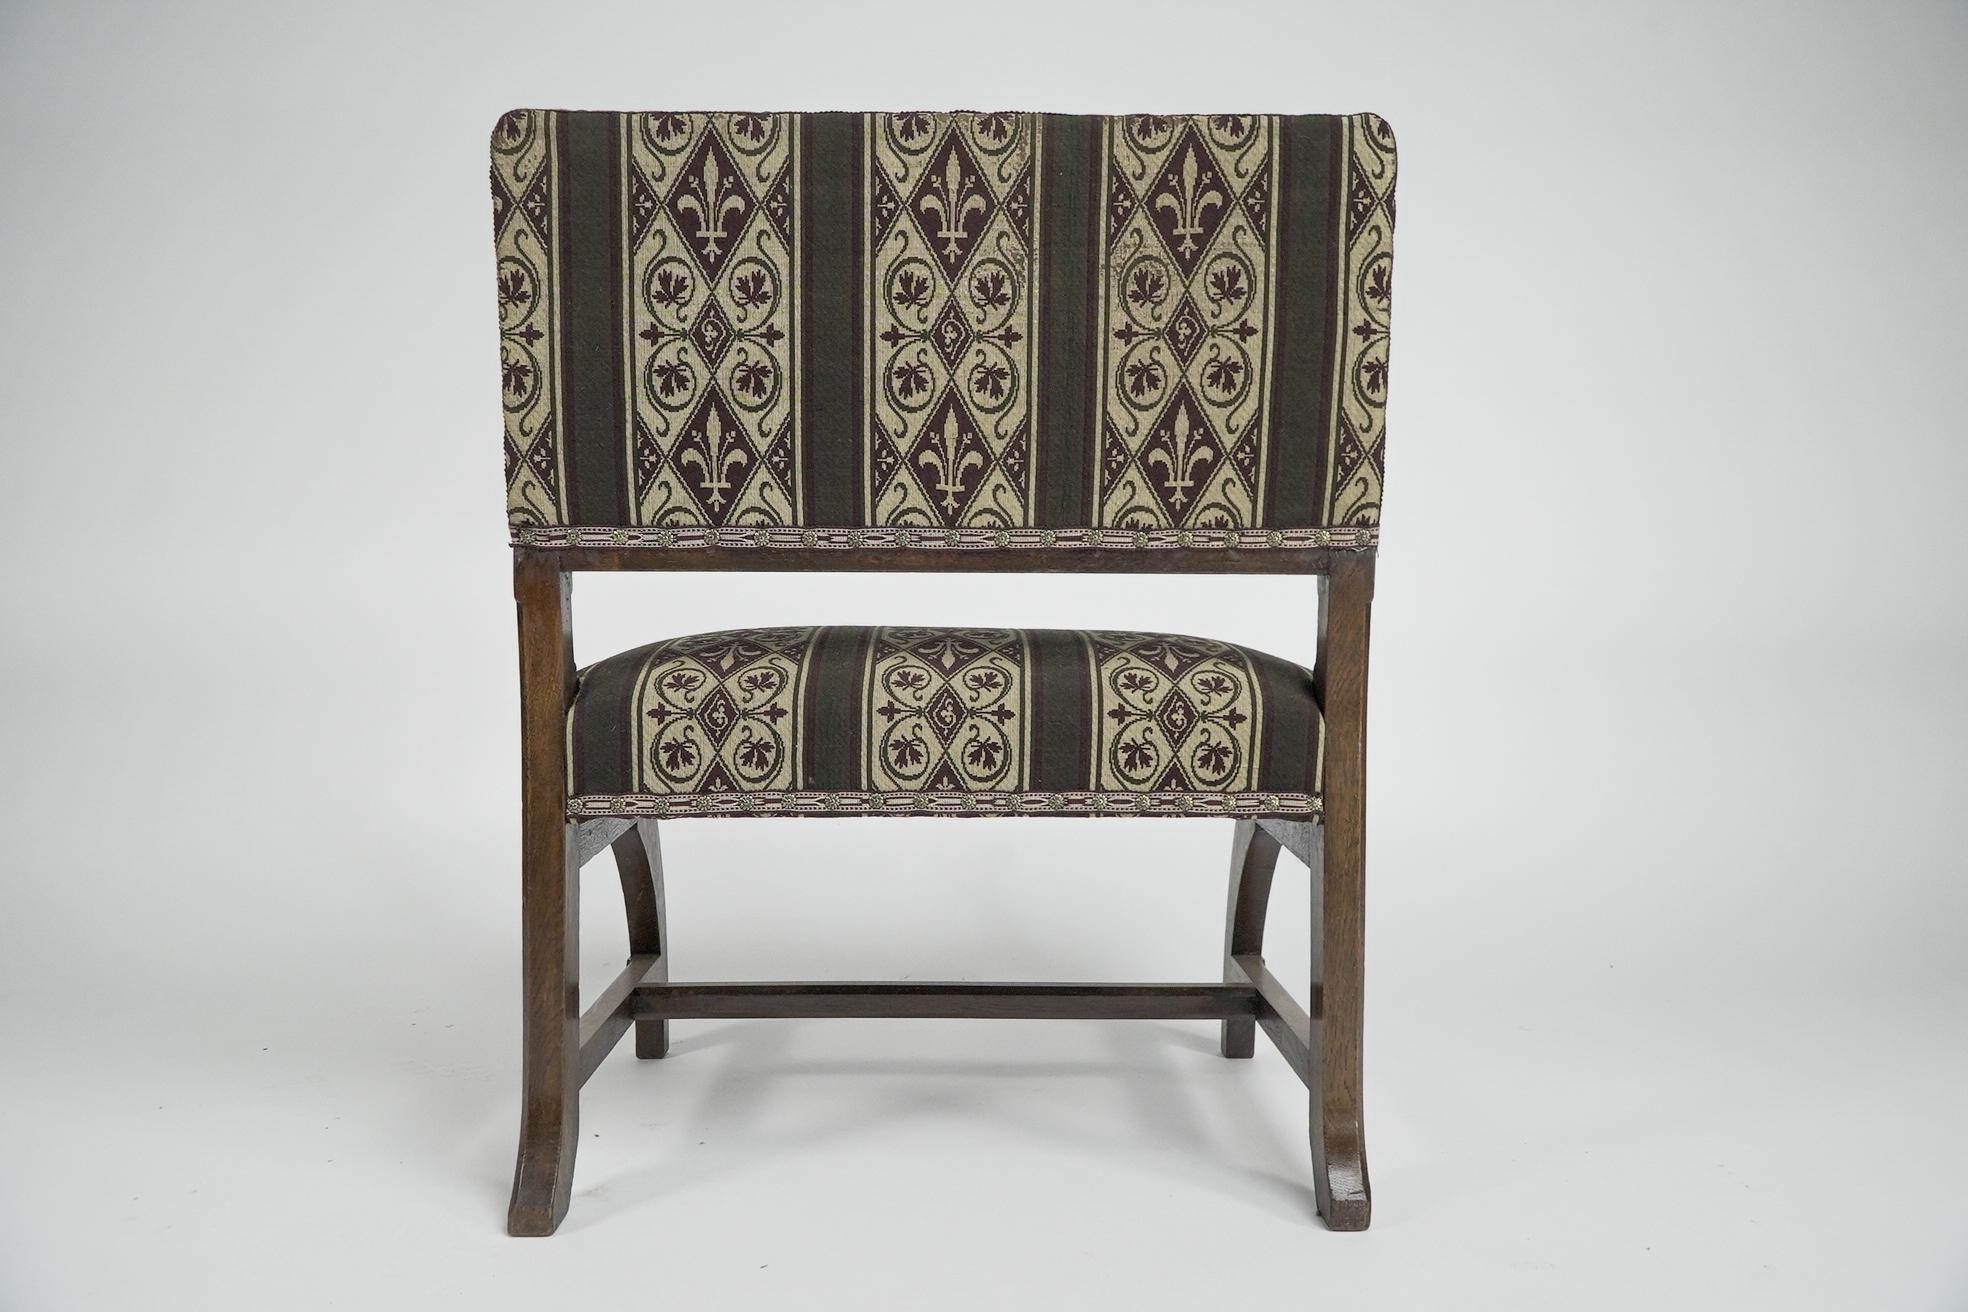 Oak E W Pugin attri. A Gothic Revival oak duet chair with a wider than usual seat. For Sale